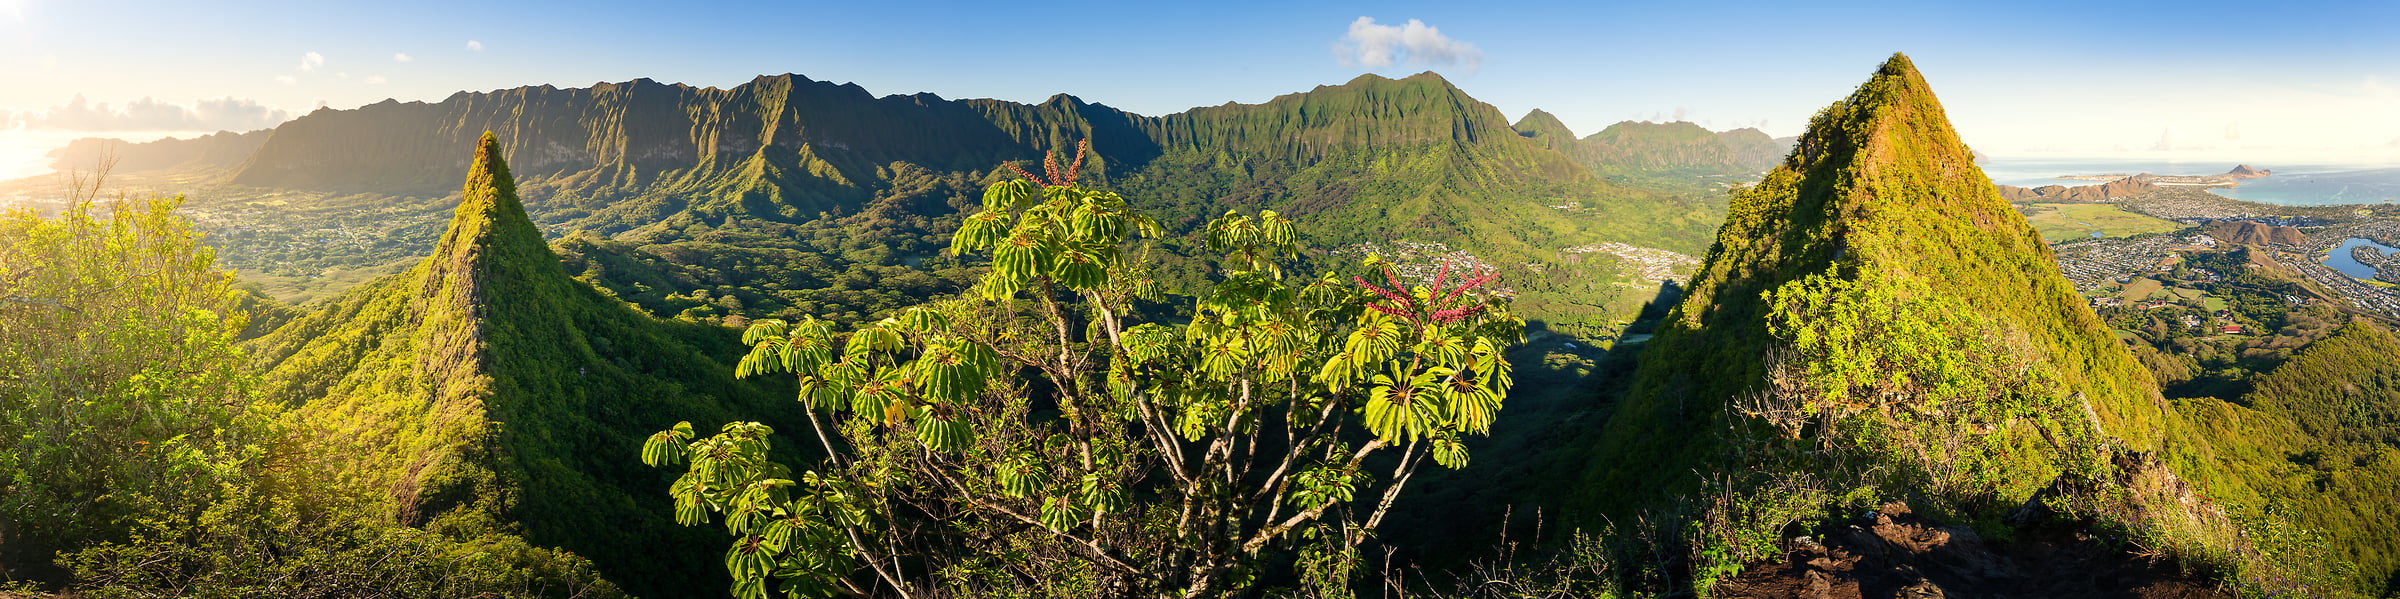 288 megapixels! A very high resolution, large-format VAST photo print of a Hawaii landscape; panorama photograph created by Jeff Lewis in Kaneohe, Hawaii